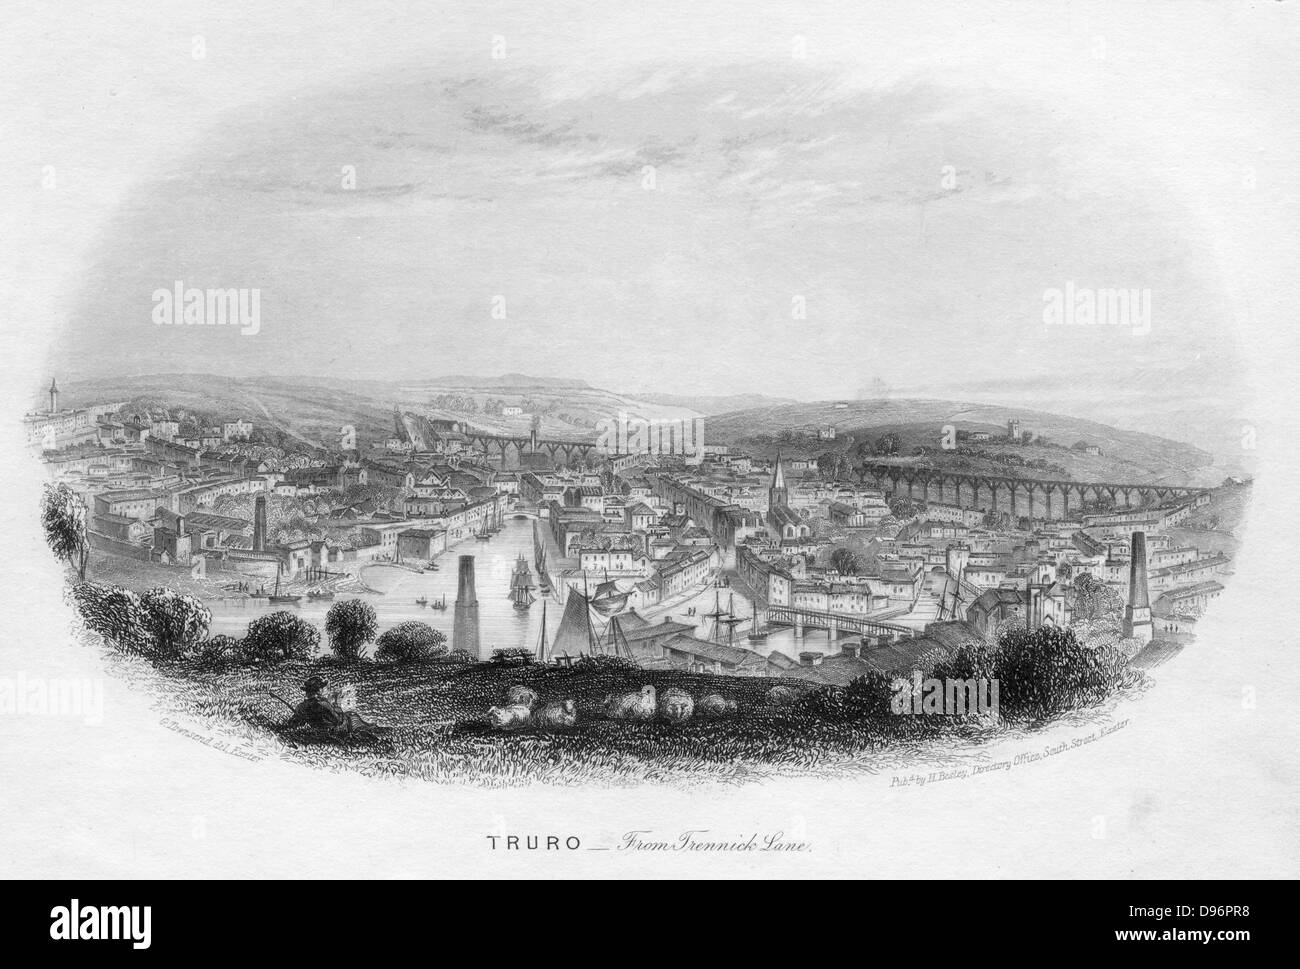 Truro, from Trennick Lane', 1860. The Cornwall Railway, later part of the Great Western Railway (GWR), at Truro, showing one of Isambard Kingdom Brunel's (1806-1859) timber viaducts, built from Kyanzed yellow Baltic pine from Memel. The timberwork had a life of 30 years. Illustration by George Townsend (1818-1894) for 'Views of Devonshire and Cornwall' by Henry Besley, (Exeter c1860). Engraving. Stock Photo